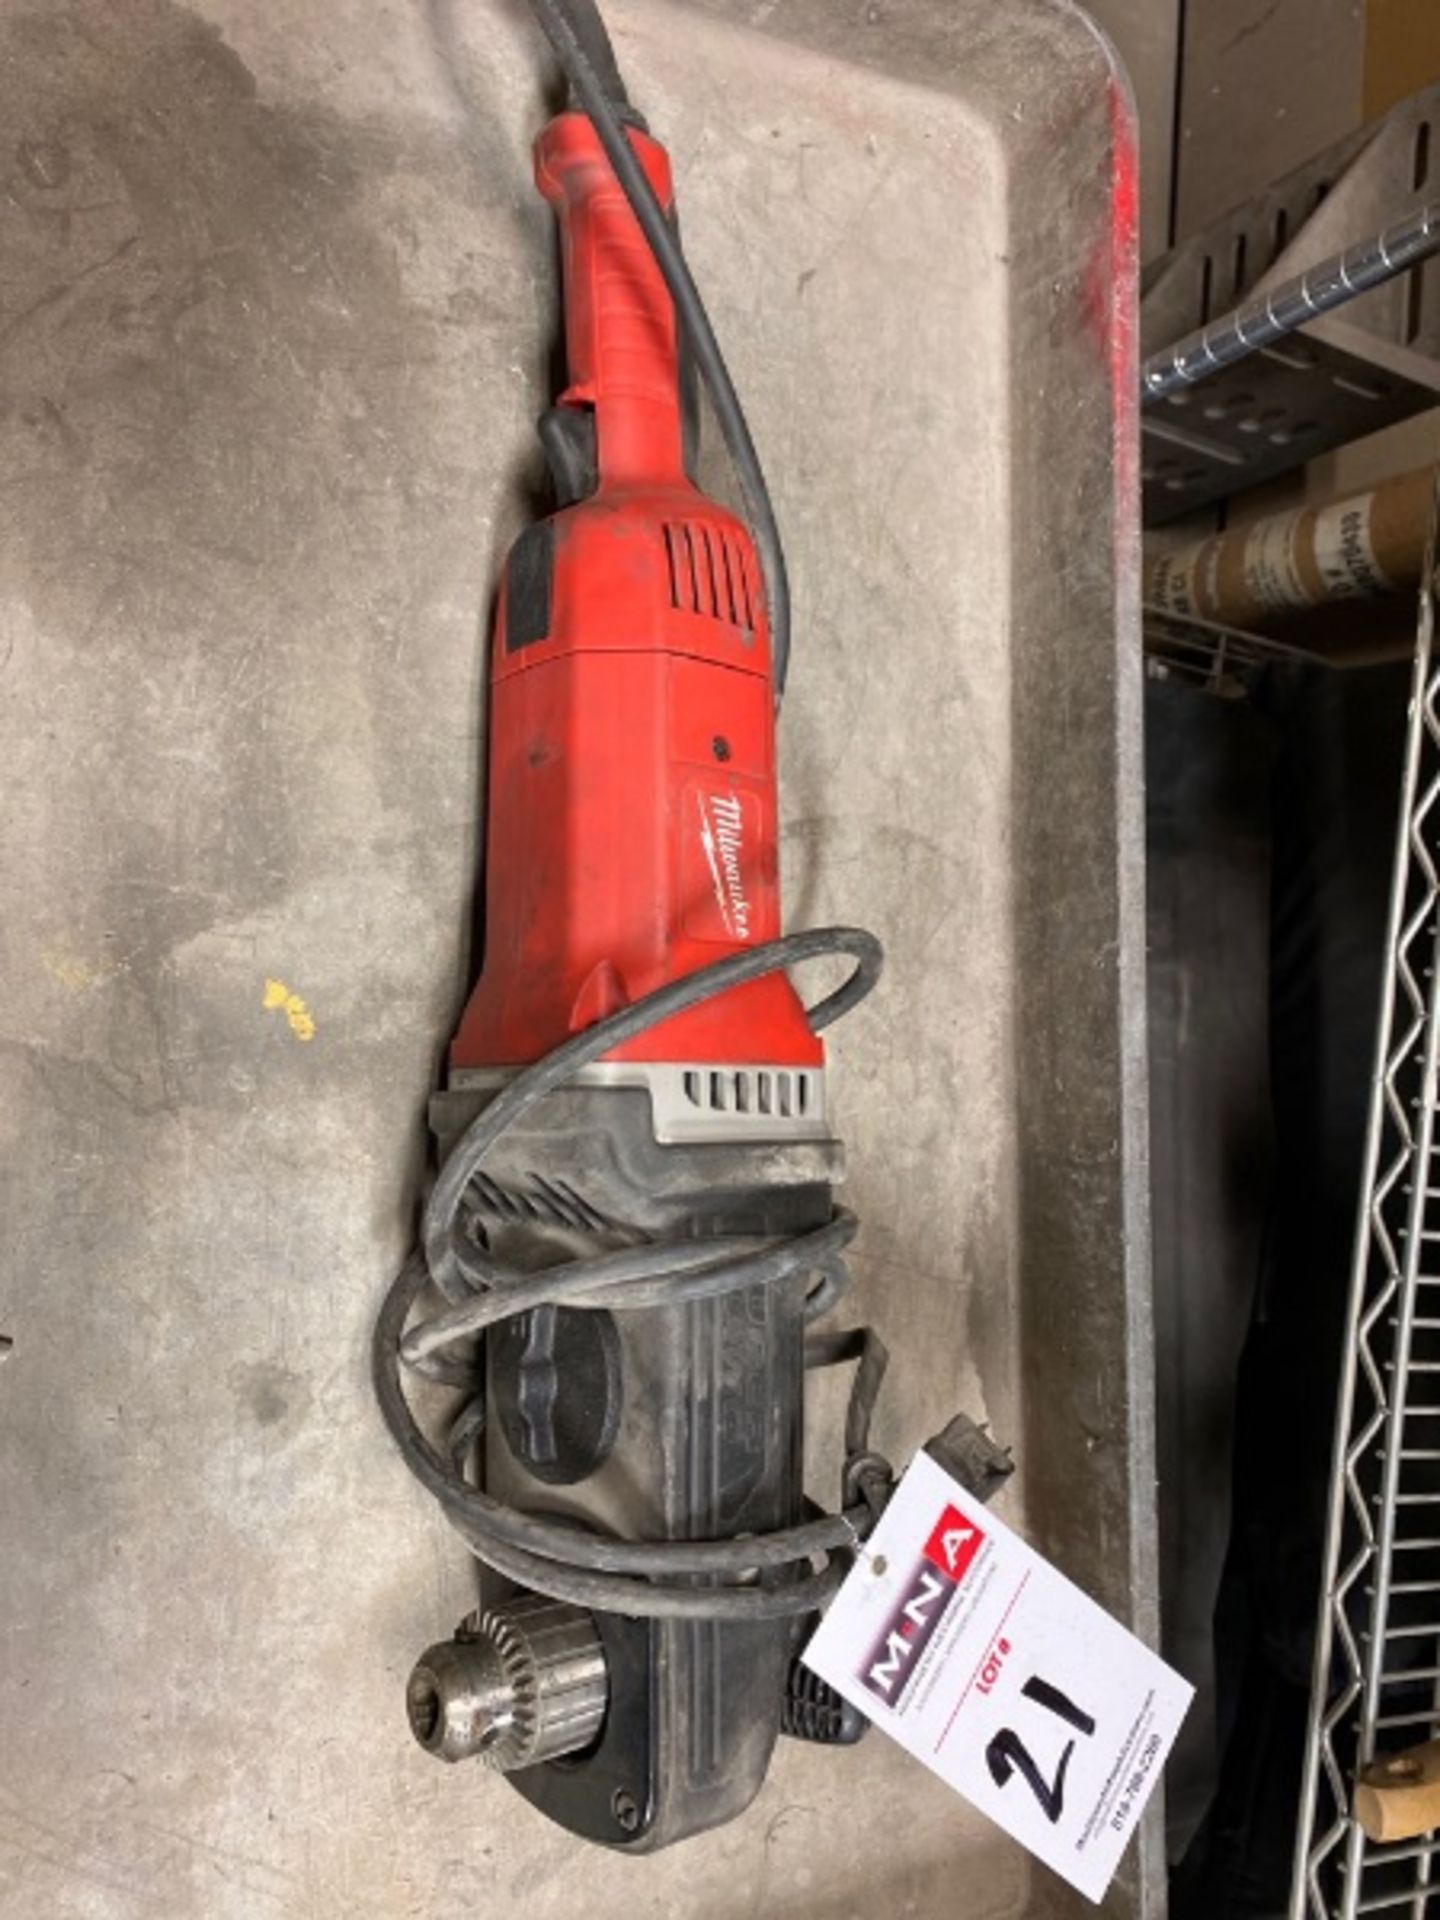 Milwaukee Super Hawg 1/2” Drive Drill - Image 2 of 3